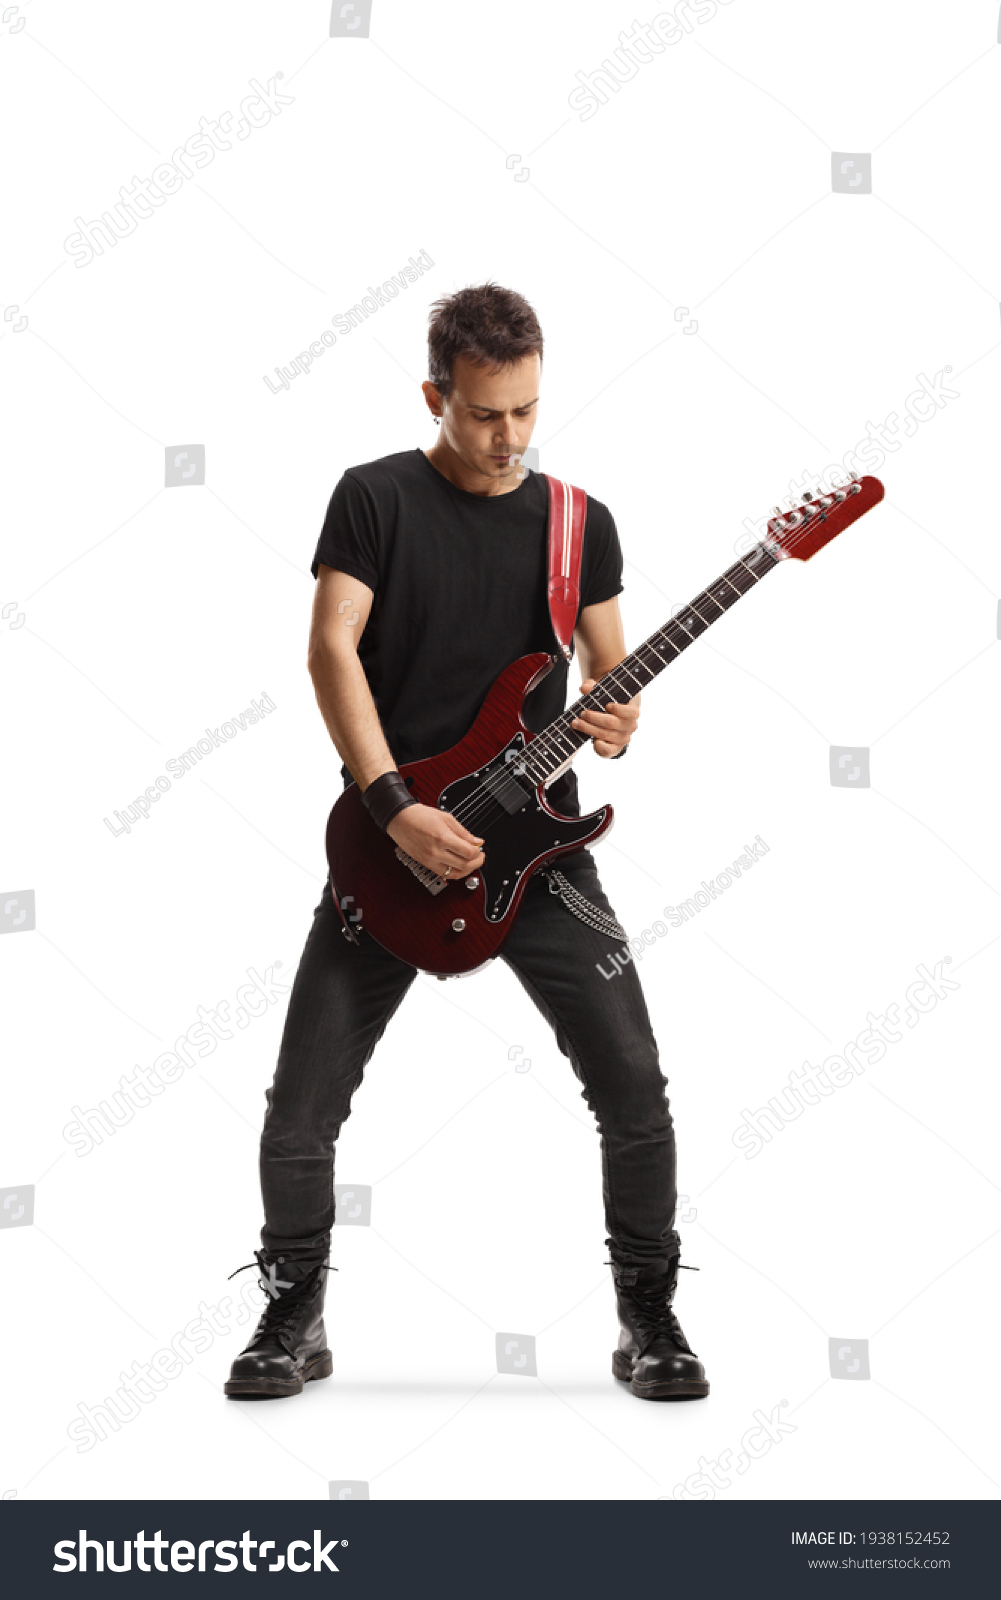 Full length portrait of a guy playing an electric guitar isolated on white background #1938152452